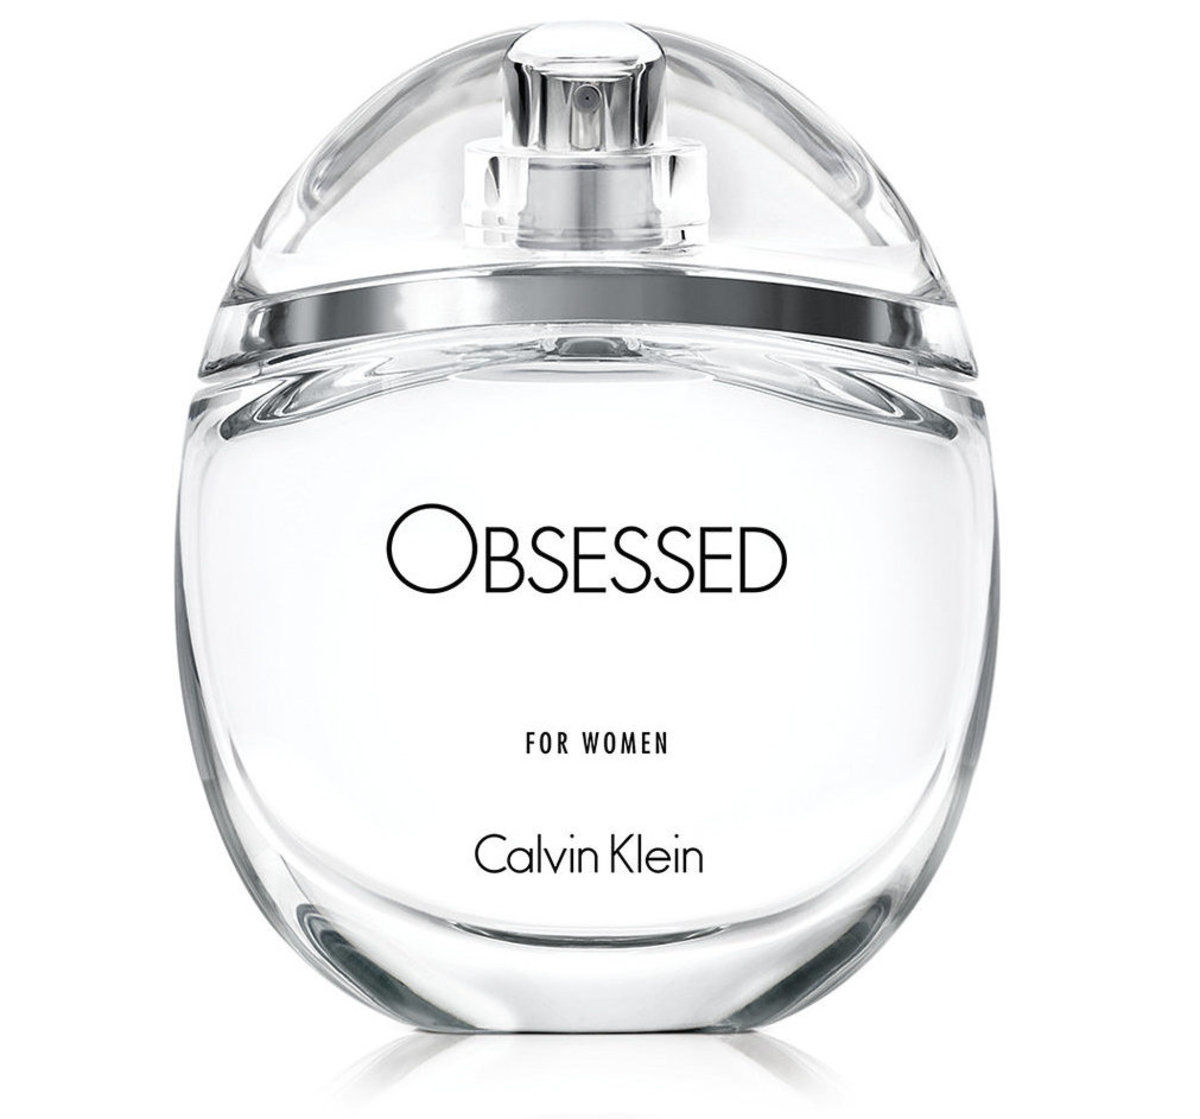 Calvin Klein Obsessed for Women, from $94, available here. Photo: Ulta